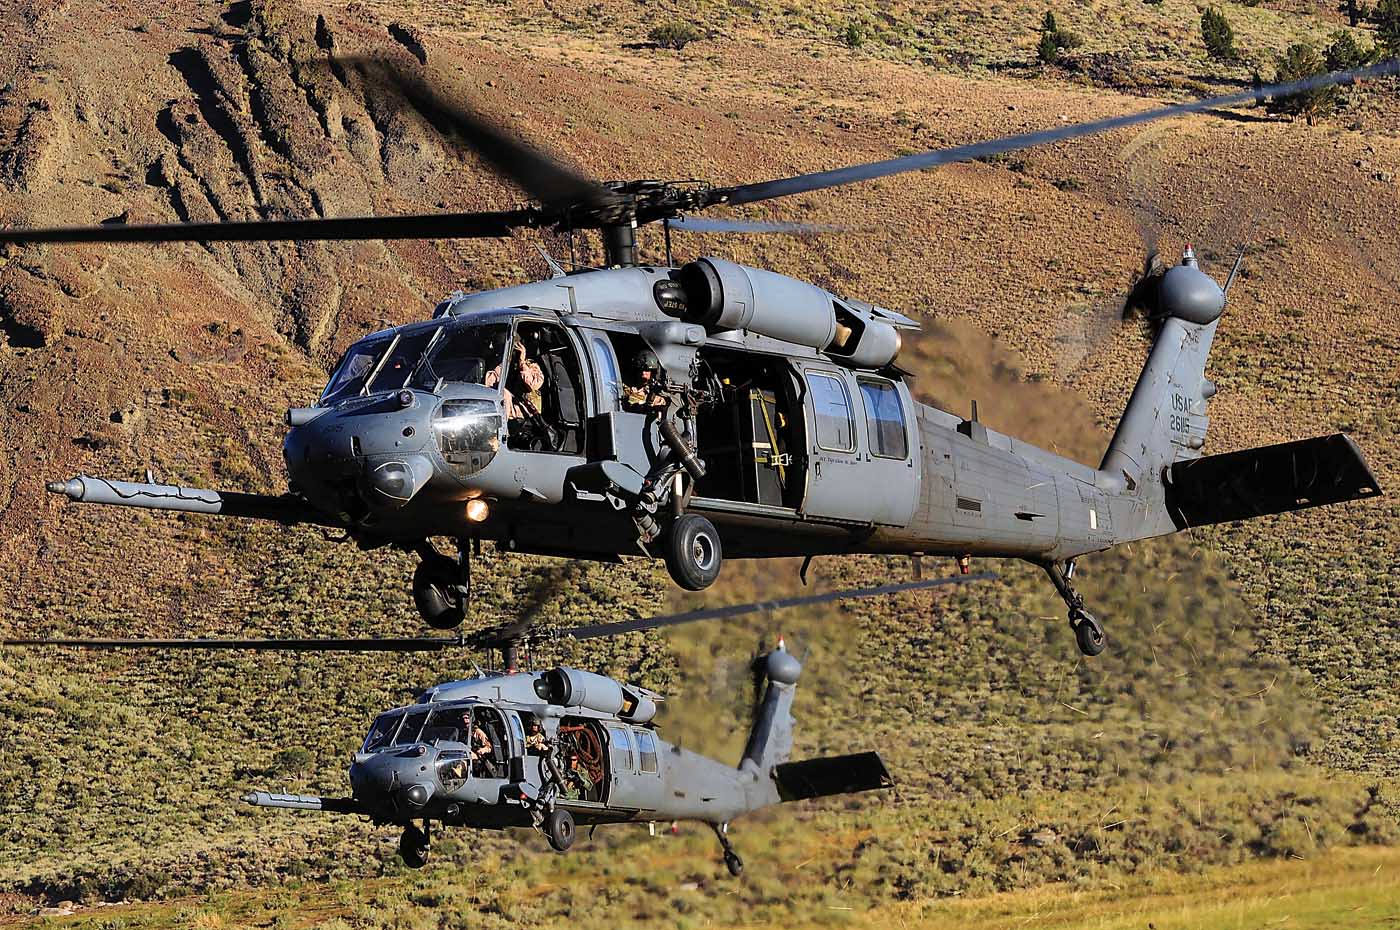 The Air Force’s aging fleet of HH-60Gs will be replaced by the new-generation HH-60W. Skip Robinson Photo